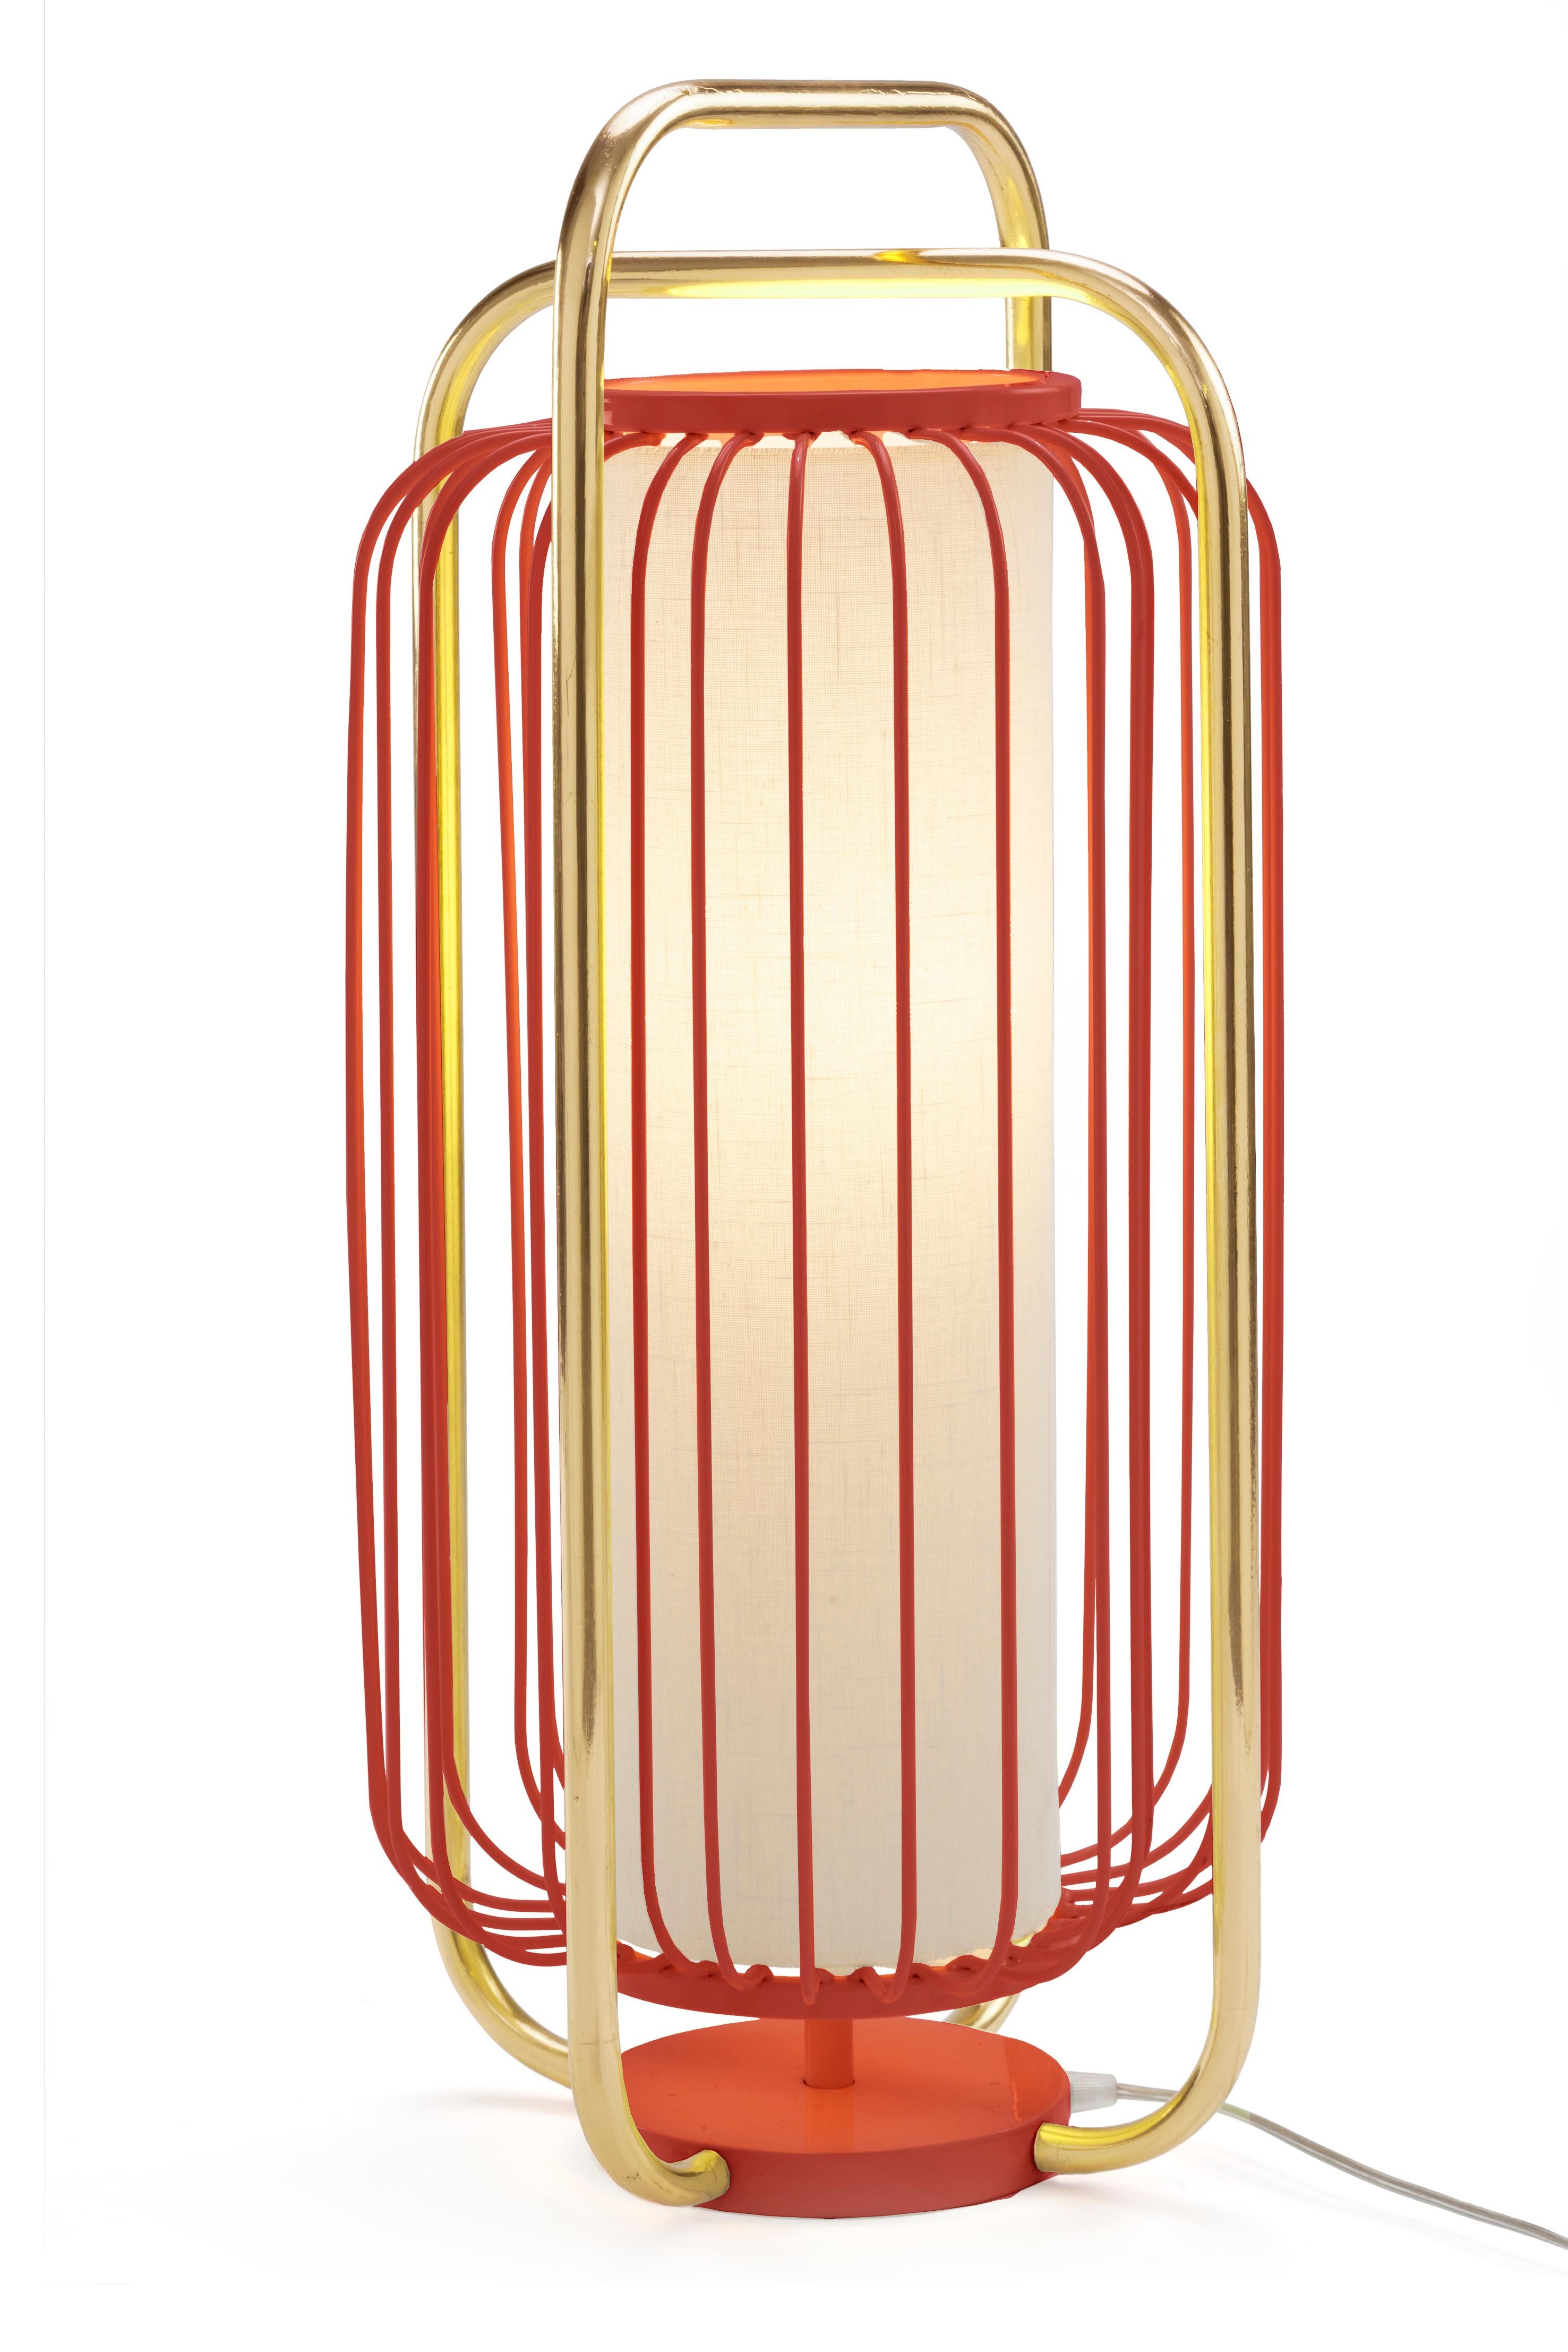 Jules is all about a timeless, effortless sophistication. A perfect combination of polished brass or copper with fun lacquered metal colors and a soft and elegant linen shade enclosed in the structure that softly diffuses the light.
The structure is